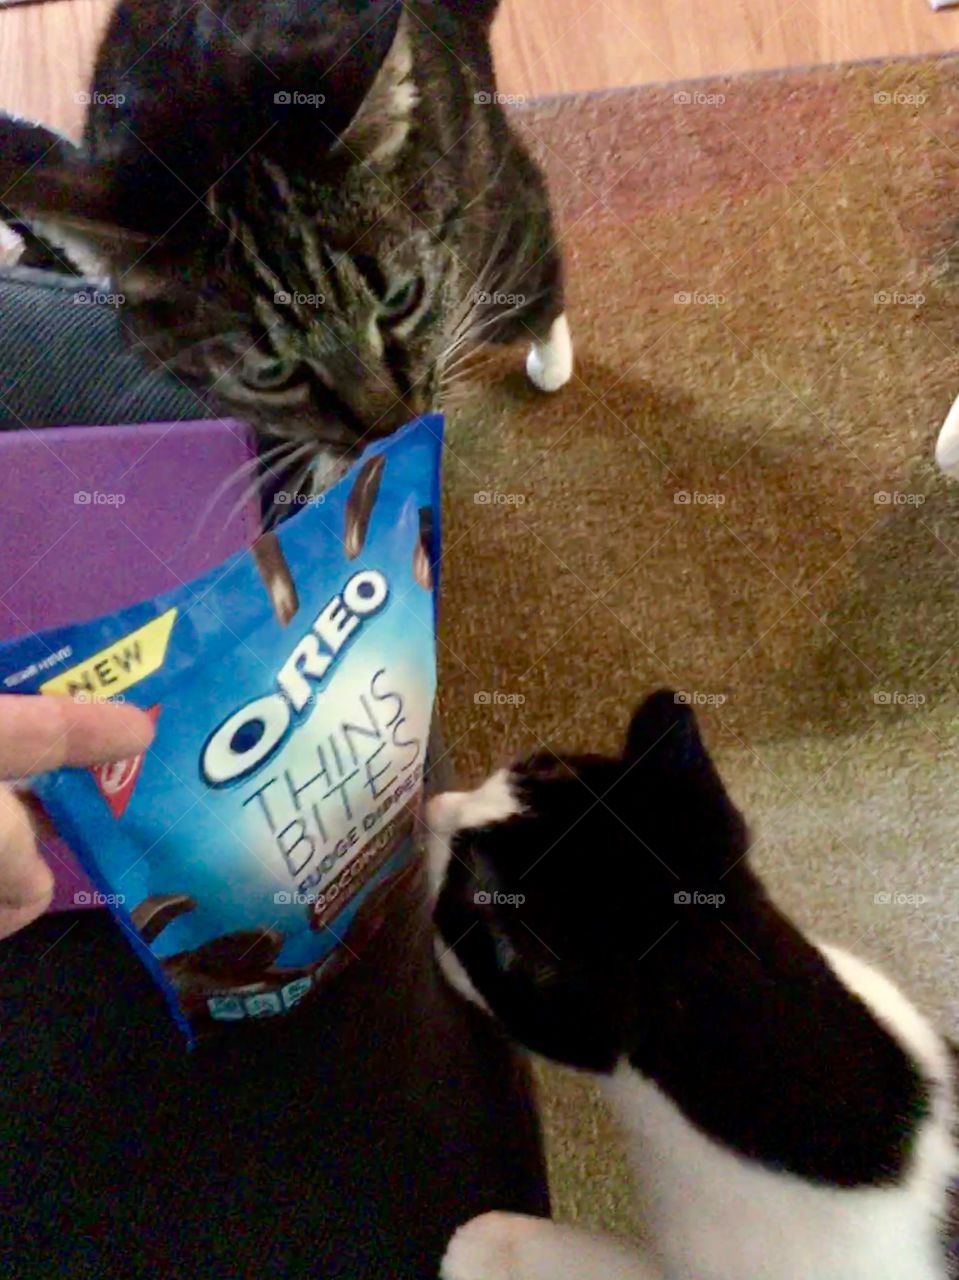 Checking out the new Oreos